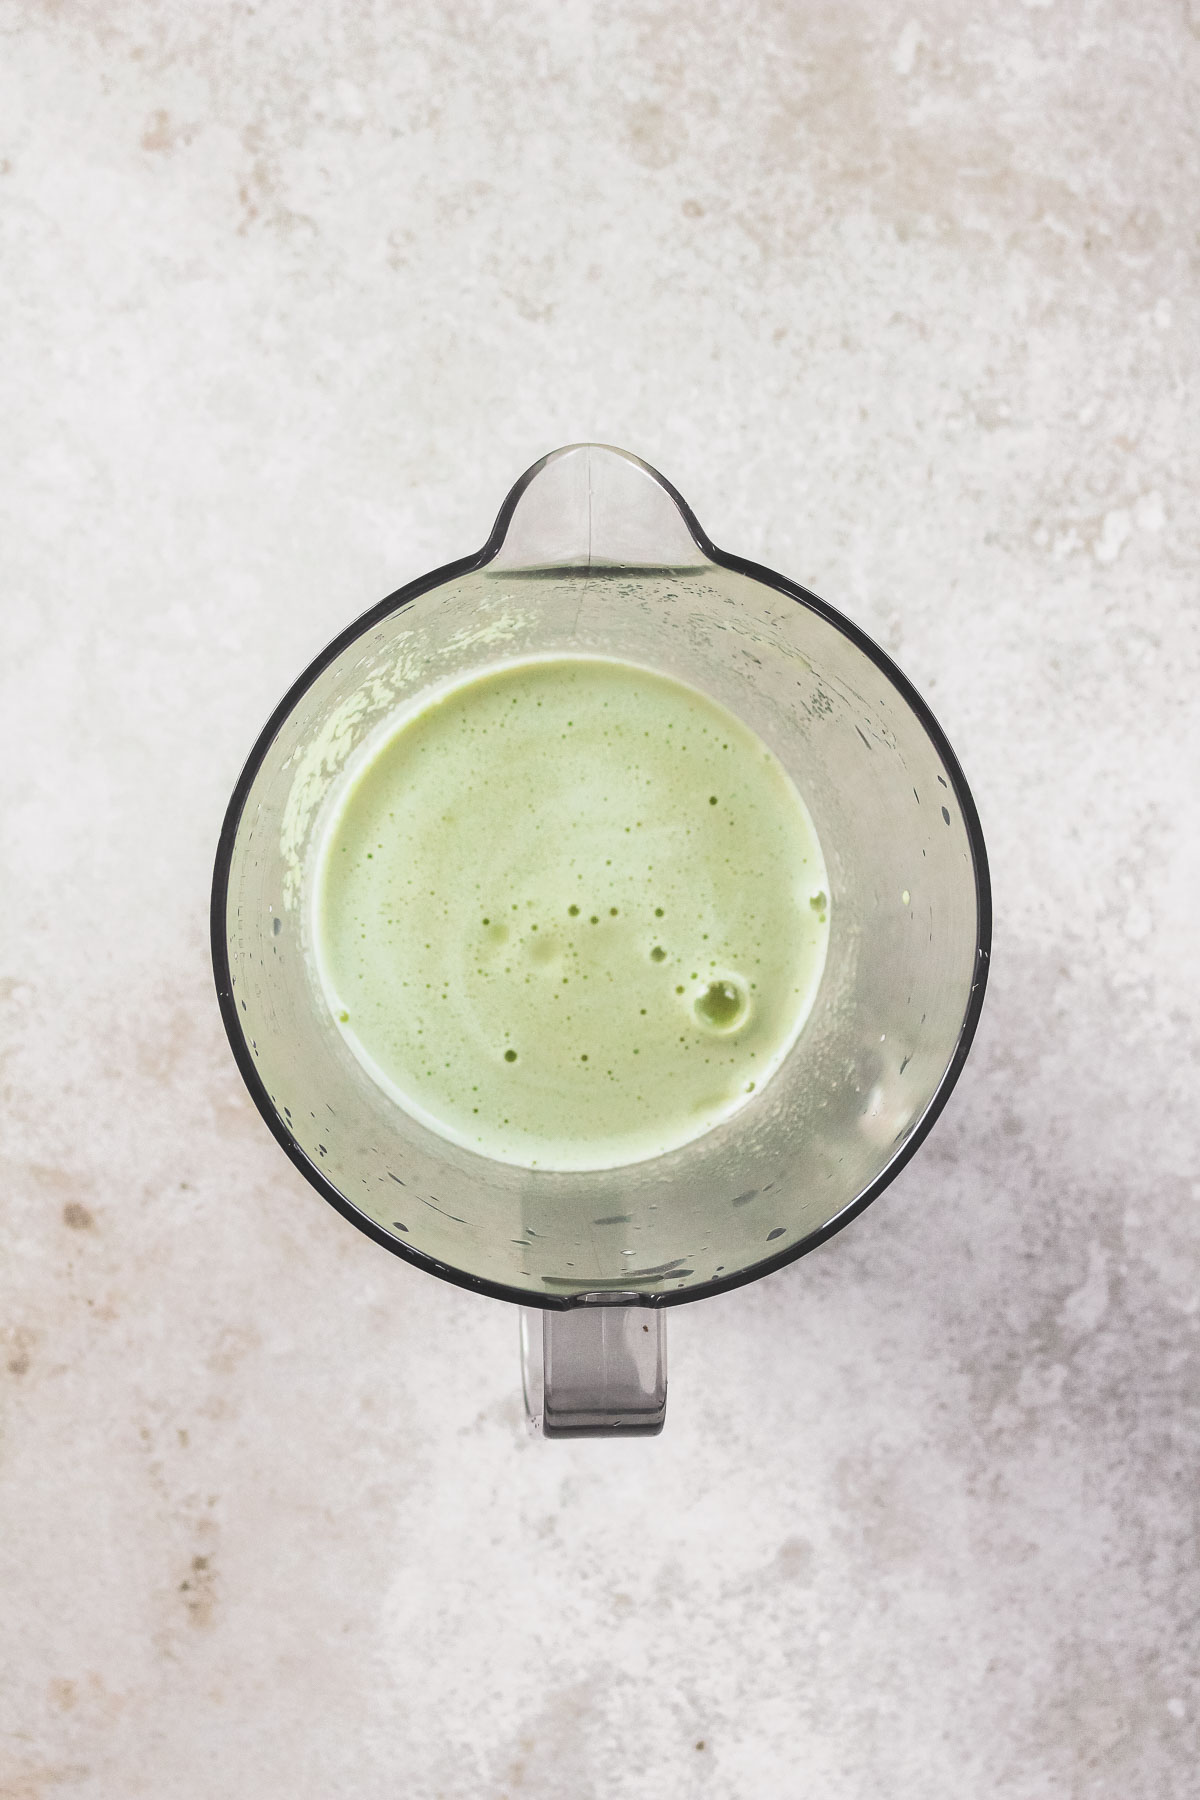 freshly pressed green juice in pitcher on beige background.